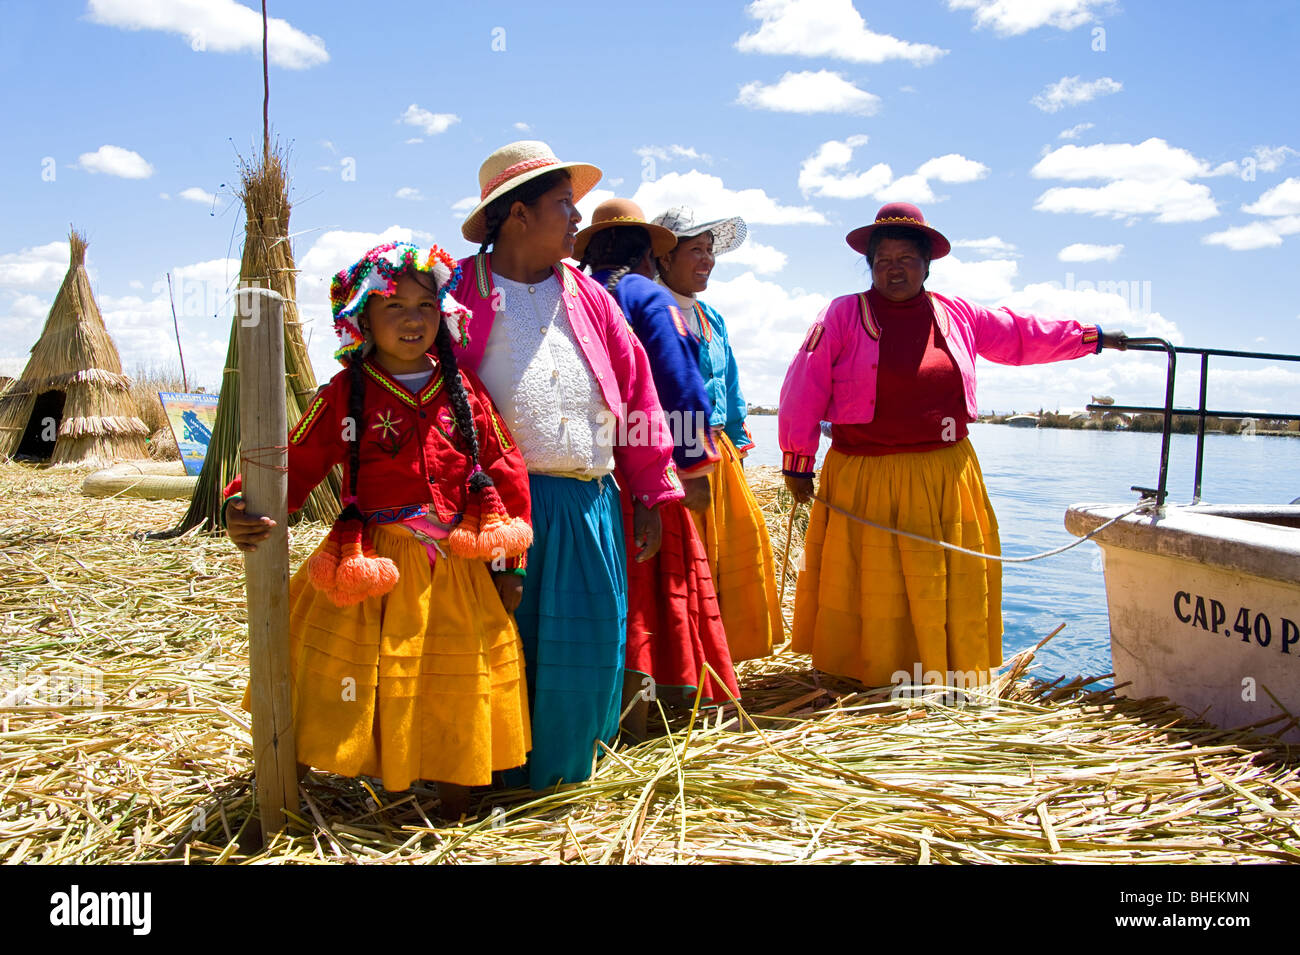 People from the Uros Island of Samary, Lake Titicaca, Peru Stock Photo